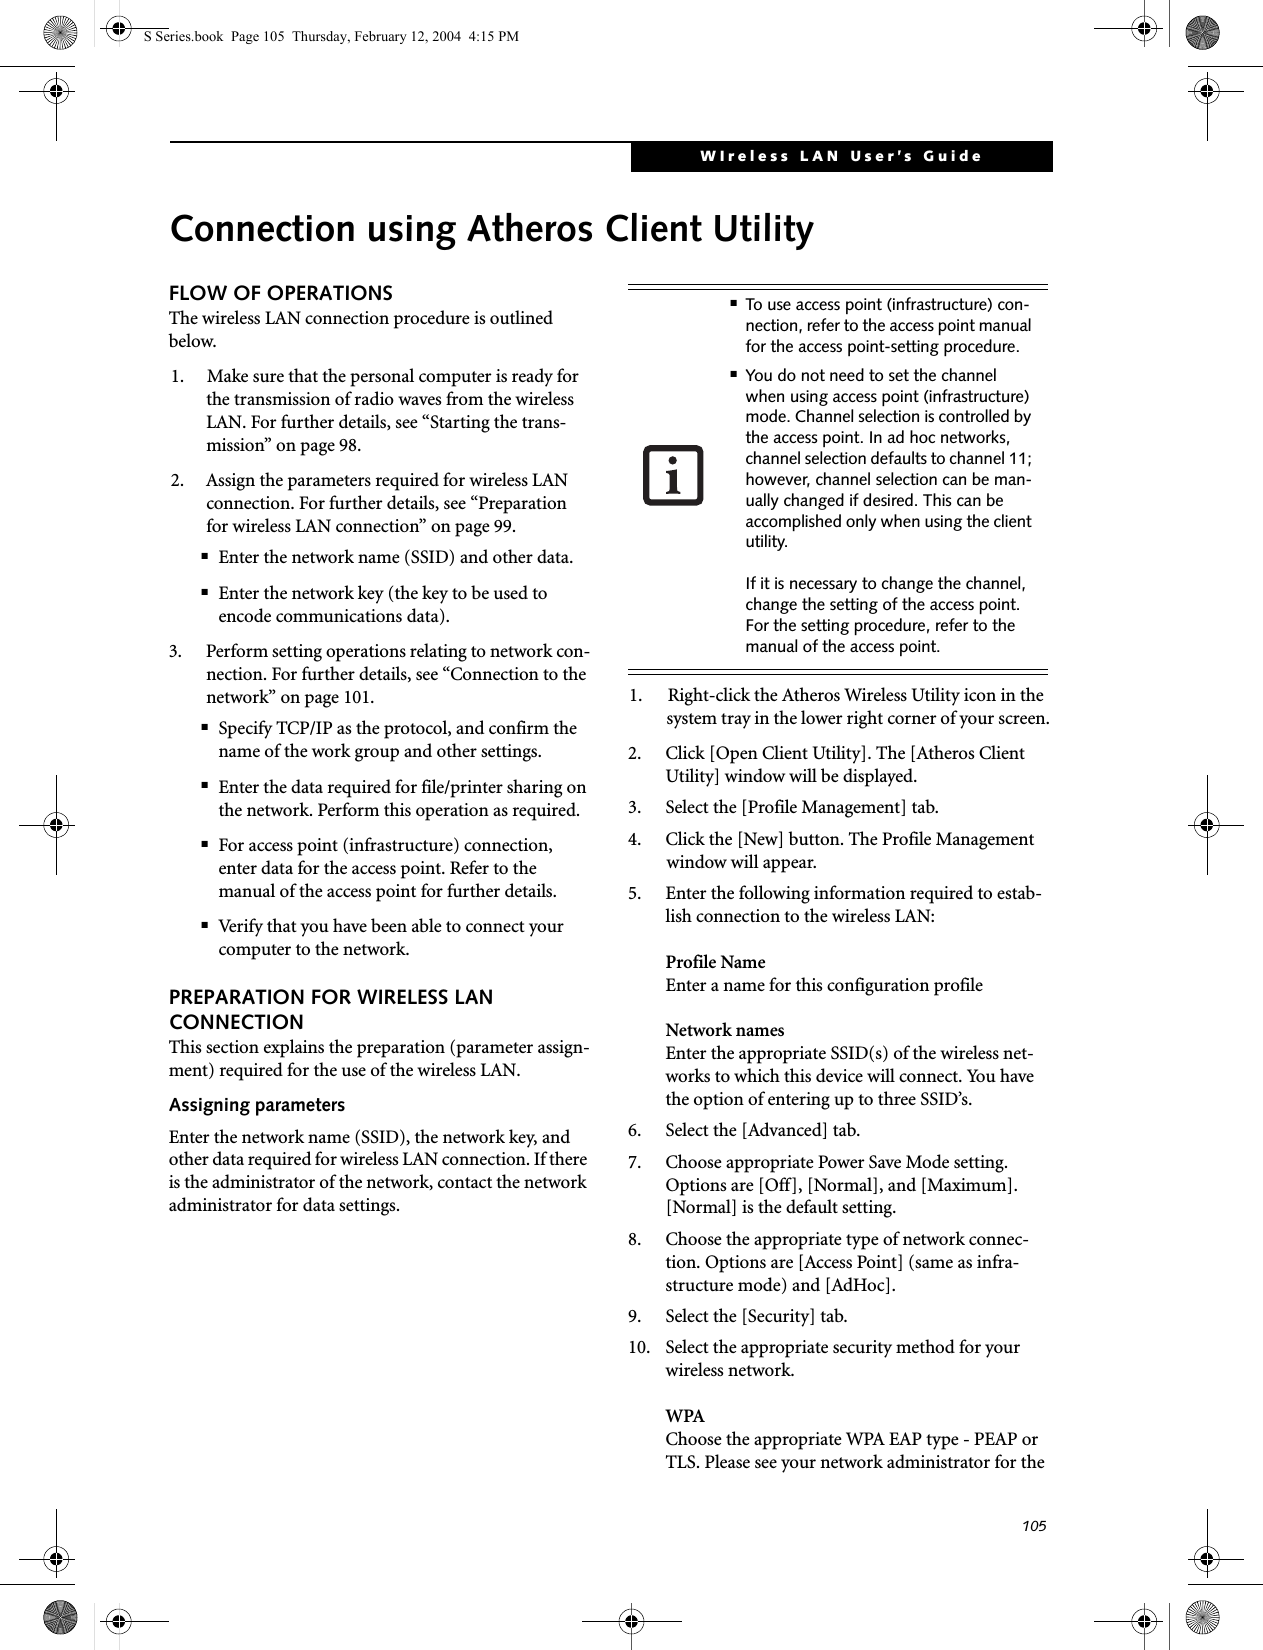 105WIreless LAN User’s Guide Connection using Atheros Client UtilityFLOW OF OPERATIONSThe wireless LAN connection procedure is outlined below.1. Make sure that the personal computer is ready for the transmission of radio waves from the wireless LAN. For further details, see “Starting the trans-mission” on page 98.2. Assign the parameters required for wireless LAN connection. For further details, see “Preparation for wireless LAN connection” on page 99.■Enter the network name (SSID) and other data.■Enter the network key (the key to be used to encode communications data).3. Perform setting operations relating to network con-nection. For further details, see “Connection to the network” on page 101.■Specify TCP/IP as the protocol, and confirm the name of the work group and other settings.■Enter the data required for file/printer sharing on the network. Perform this operation as required.■For access point (infrastructure) connection, enter data for the access point. Refer to the manual of the access point for further details.■Verify that you have been able to connect your computer to the network.PREPARATION FOR WIRELESS LAN CONNECTIONThis section explains the preparation (parameter assign-ment) required for the use of the wireless LAN.Assigning parametersEnter the network name (SSID), the network key, and other data required for wireless LAN connection. If there is the administrator of the network, contact the network administrator for data settings.1. Right-click the Atheros Wireless Utility icon in the system tray in the lower right corner of your screen.2. Click [Open Client Utility]. The [Atheros Client Utility] window will be displayed.3. Select the [Profile Management] tab.4. Click the [New] button. The Profile Management window will appear.5. Enter the following information required to estab-lish connection to the wireless LAN:Profile NameEnter a name for this configuration profileNetwork namesEnter the appropriate SSID(s) of the wireless net-works to which this device will connect. You have the option of entering up to three SSID’s.6. Select the [Advanced] tab.7. Choose appropriate Power Save Mode setting. Options are [Off], [Normal], and [Maximum]. [Normal] is the default setting.8. Choose the appropriate type of network connec-tion. Options are [Access Point] (same as infra-structure mode) and [AdHoc].9. Select the [Security] tab.10. Select the appropriate security method for your wireless network.WPAChoose the appropriate WPA EAP type - PEAP or TLS. Please see your network administrator for the ■To use access point (infrastructure) con-nection, refer to the access point manual for the access point-setting procedure.■You do not need to set the channel when using access point (infrastructure) mode. Channel selection is controlled by the access point. In ad hoc networks, channel selection defaults to channel 11; however, channel selection can be man-ually changed if desired. This can be accomplished only when using the client utility.If it is necessary to change the channel, change the setting of the access point. For the setting procedure, refer to the manual of the access point.S Series.book  Page 105  Thursday, February 12, 2004  4:15 PM